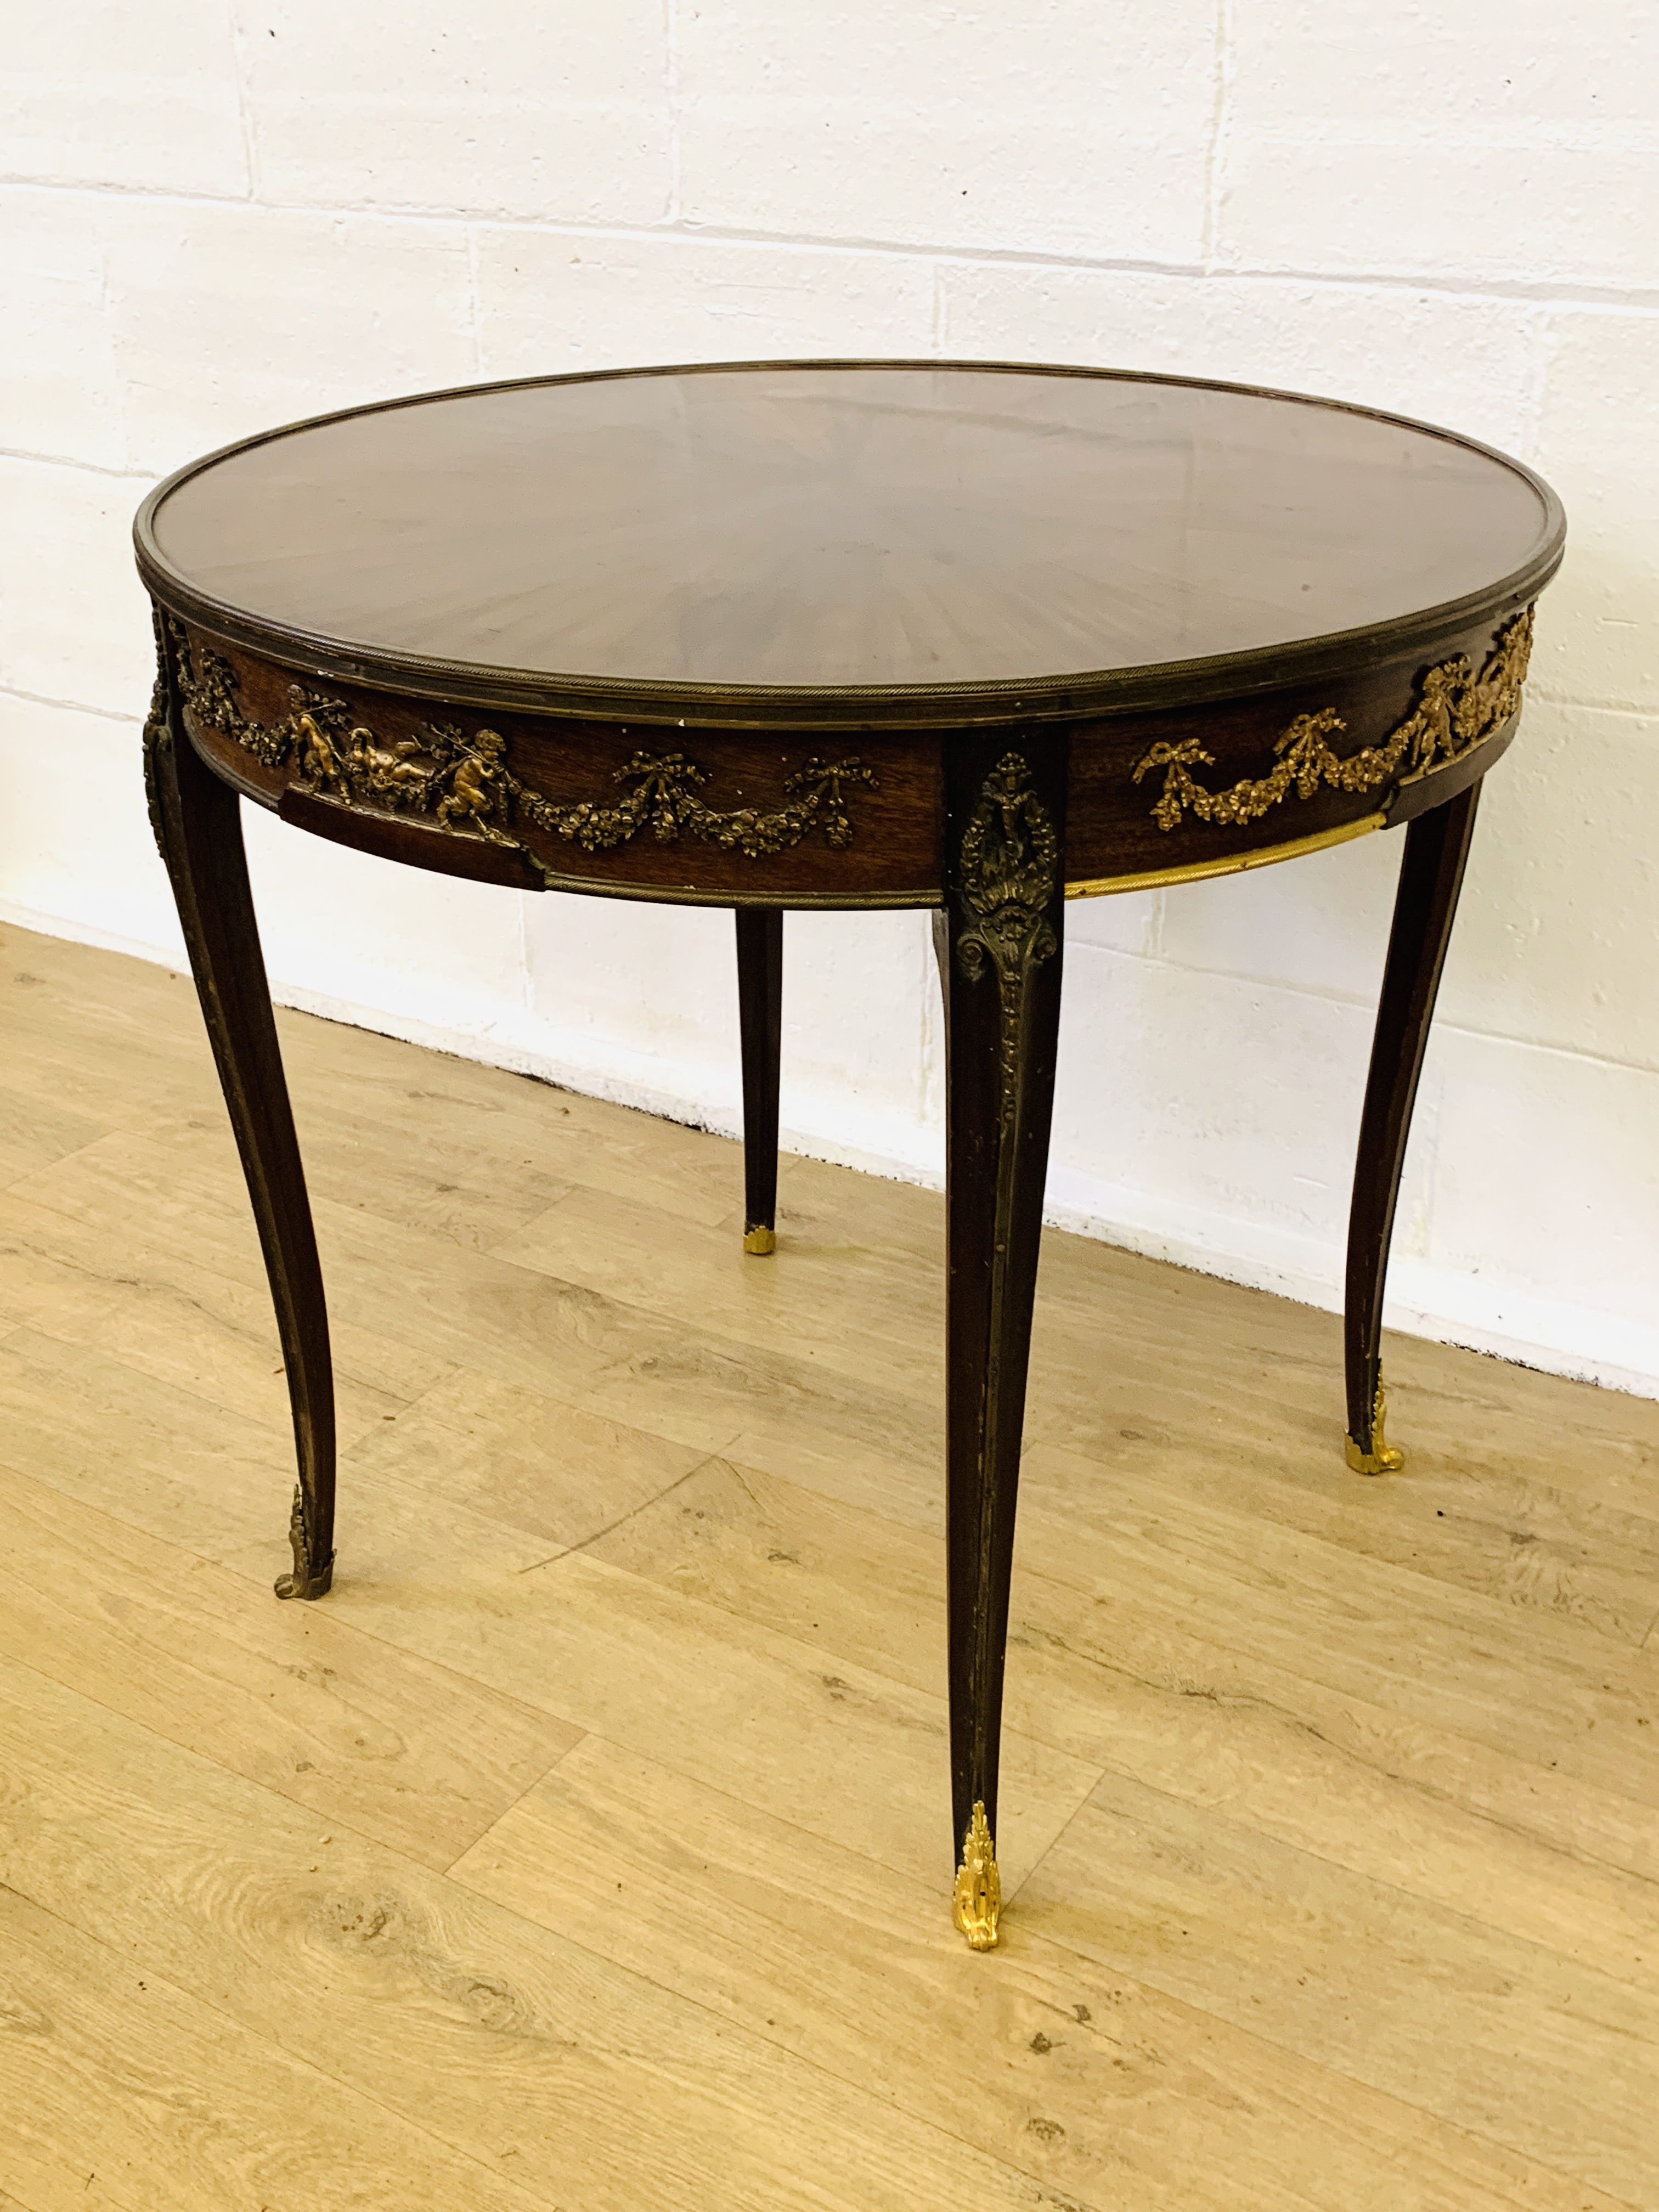 French empire style display table